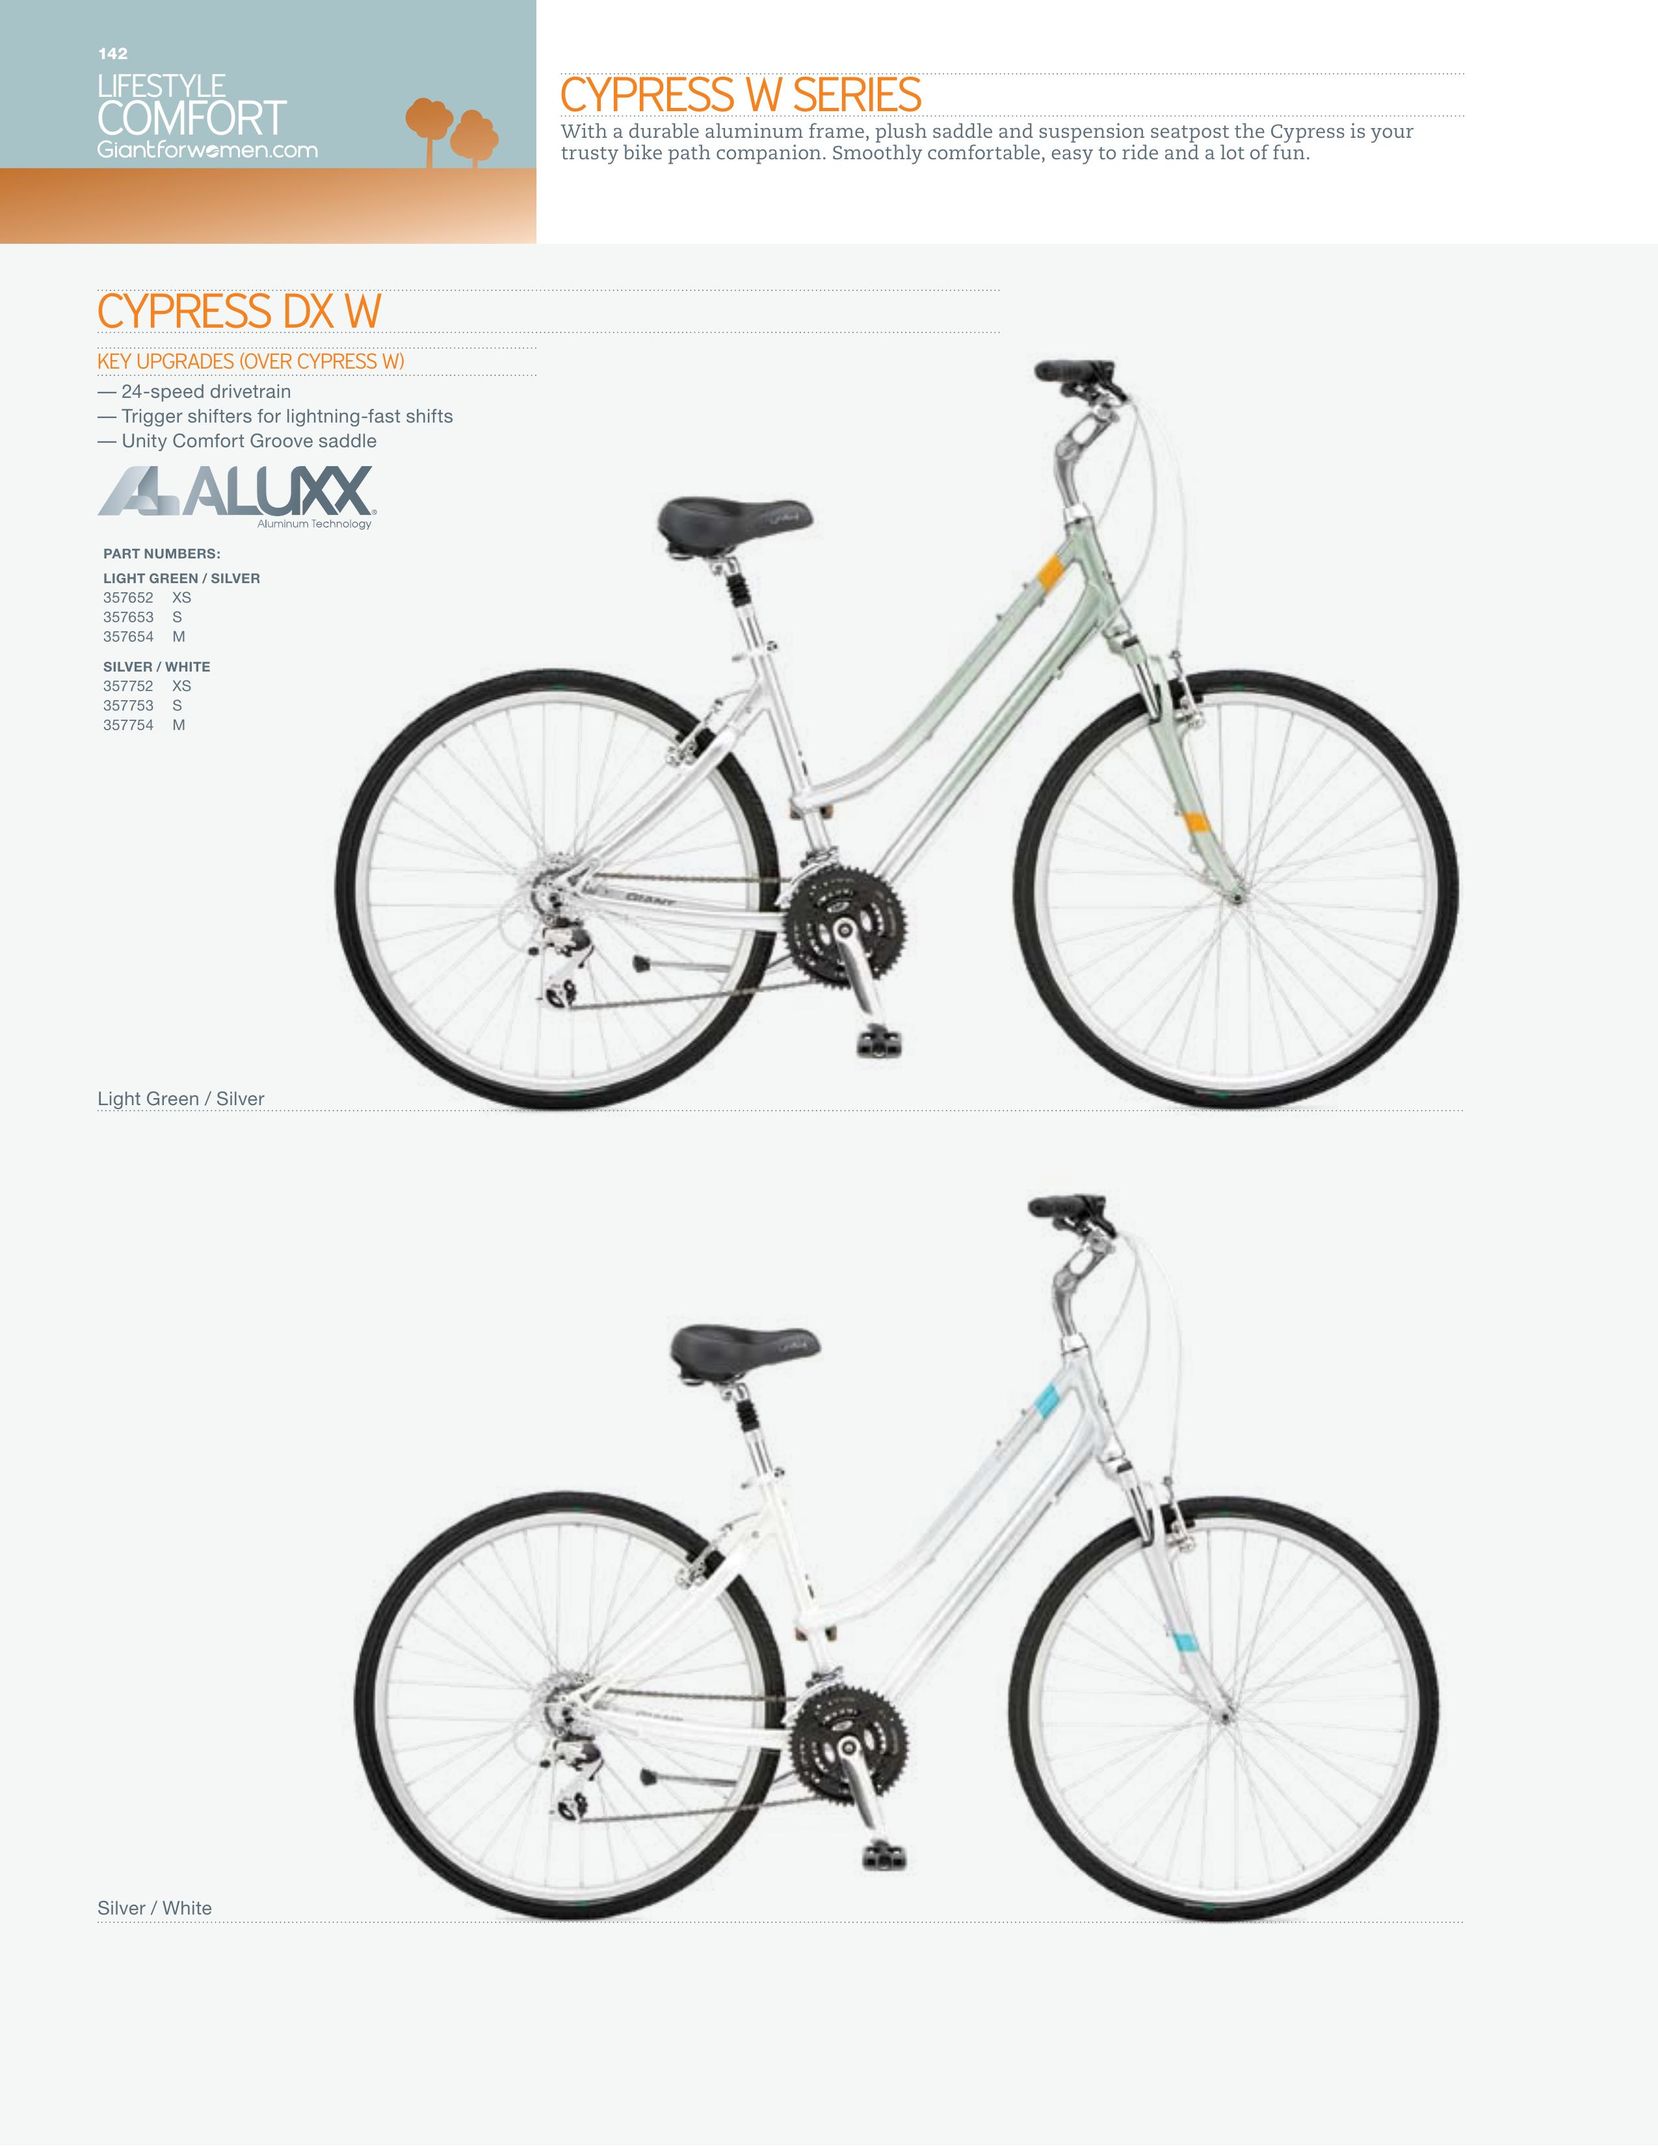 Giant Cypress DX W Bicycle User Manual